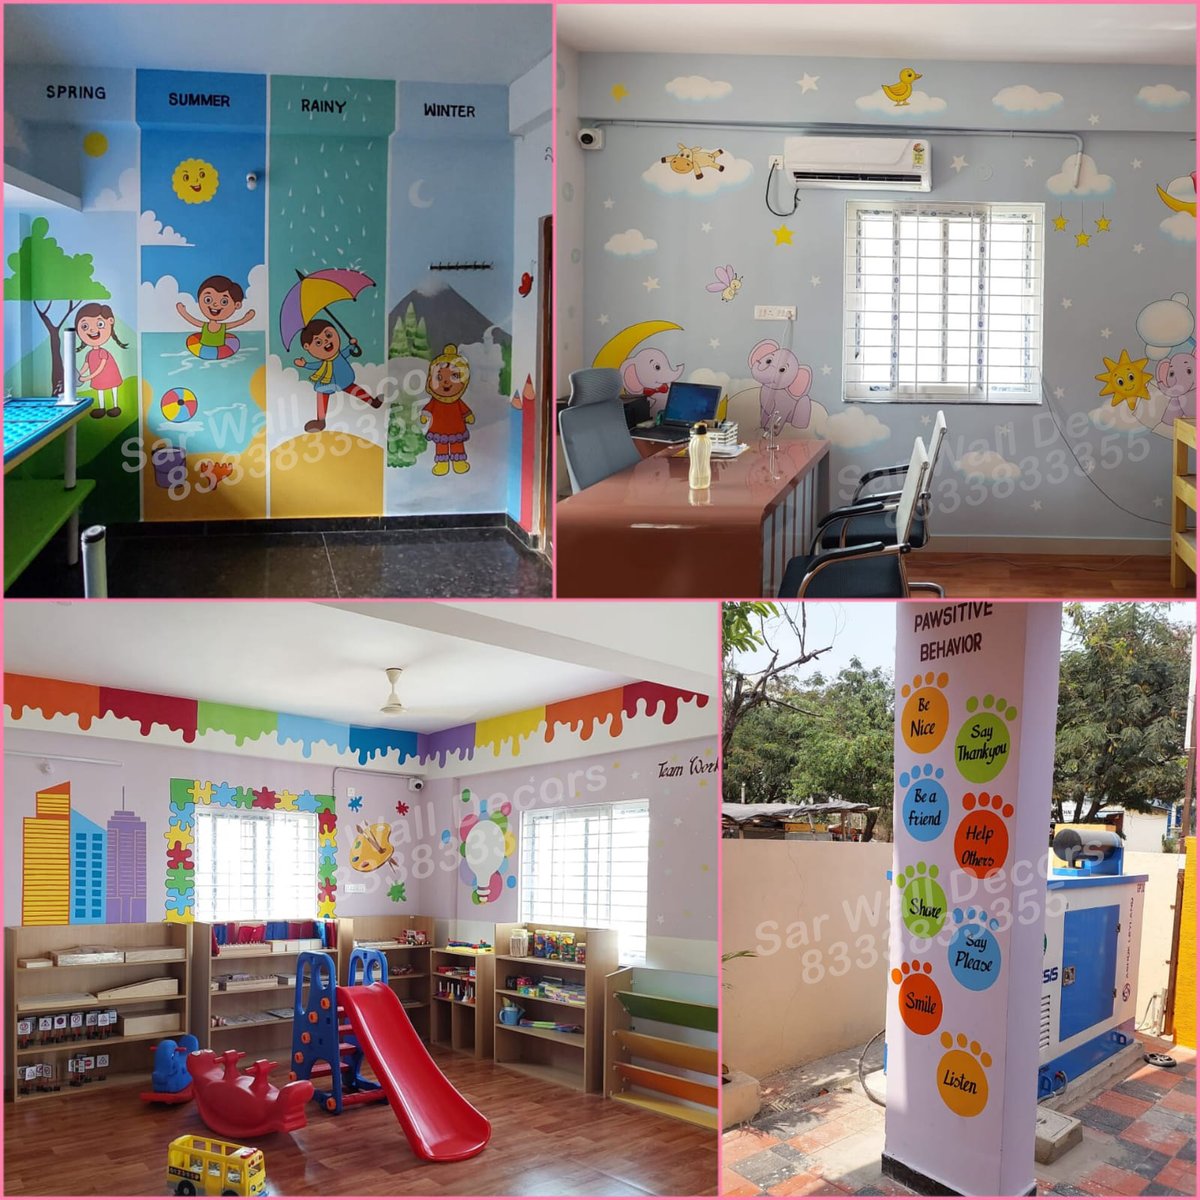 Play School Painting Pictures in ALPHABETZ INTERNATIONAL PRESCHOOL at Machabolarum
#playschoolpaintingpictures
#nurseryschoolwallpainting
#wallpaintingforplayschool
#schoolwallpaintingartist
#educationalwallpaintingforprimaryschool
#cartoonpainting
#classroomwall
#paintingfor